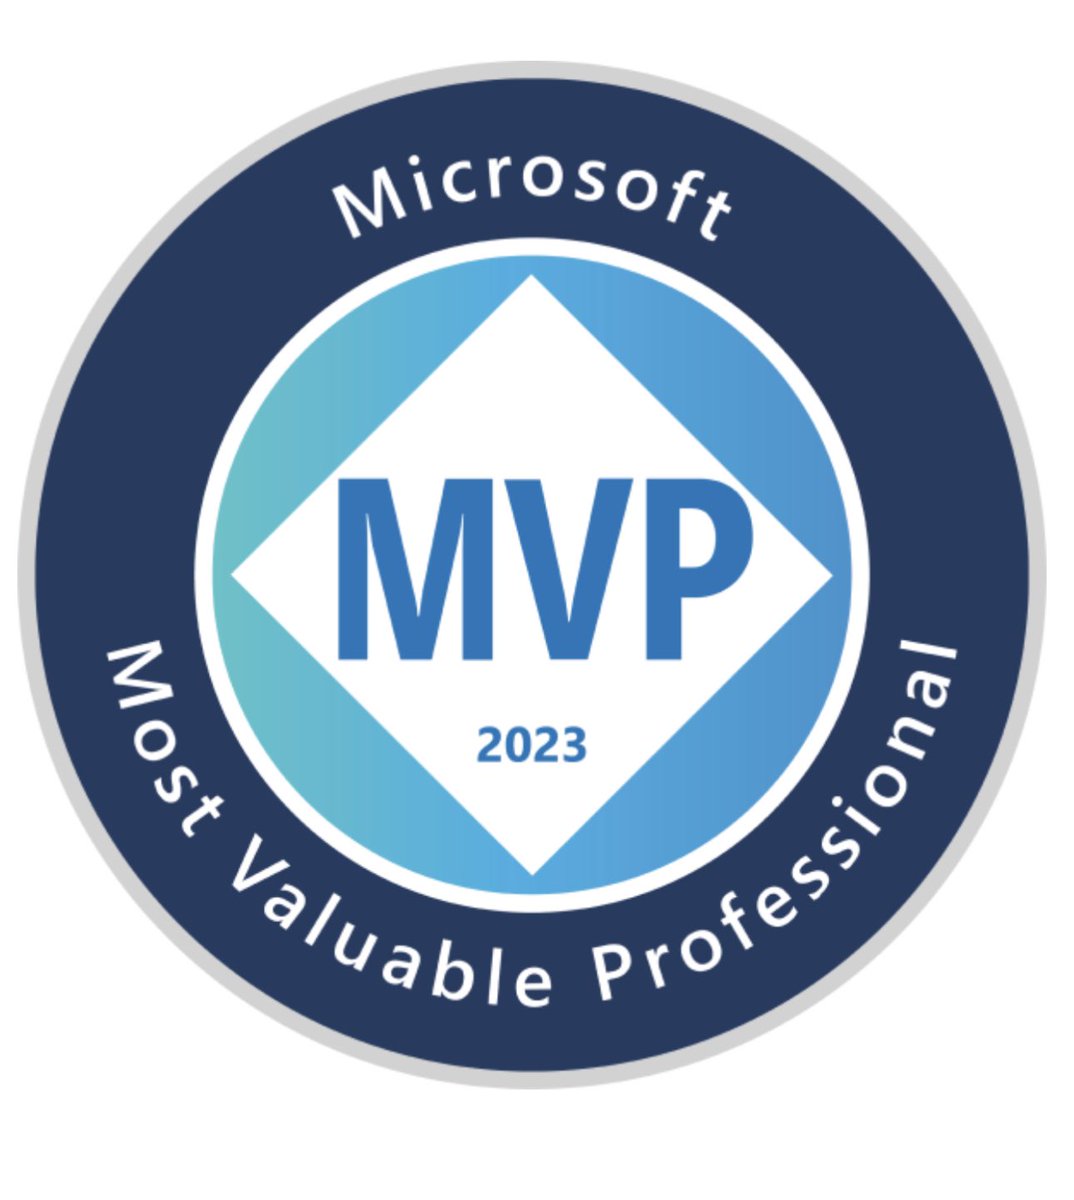 An experience that couldn't make me prouder - I've received the #Microsoft MVP Award for Azure Hybrid for the fifth time in a row!🏆
#Microsoft #Azure #MicrosoftAzure #MicrosoftHybid #AzureHybrid  #AzureStackHub #AzureStackHCI #HybridAzure  #MicrosoftAzureArc #MVPAward  #MVPBuzz